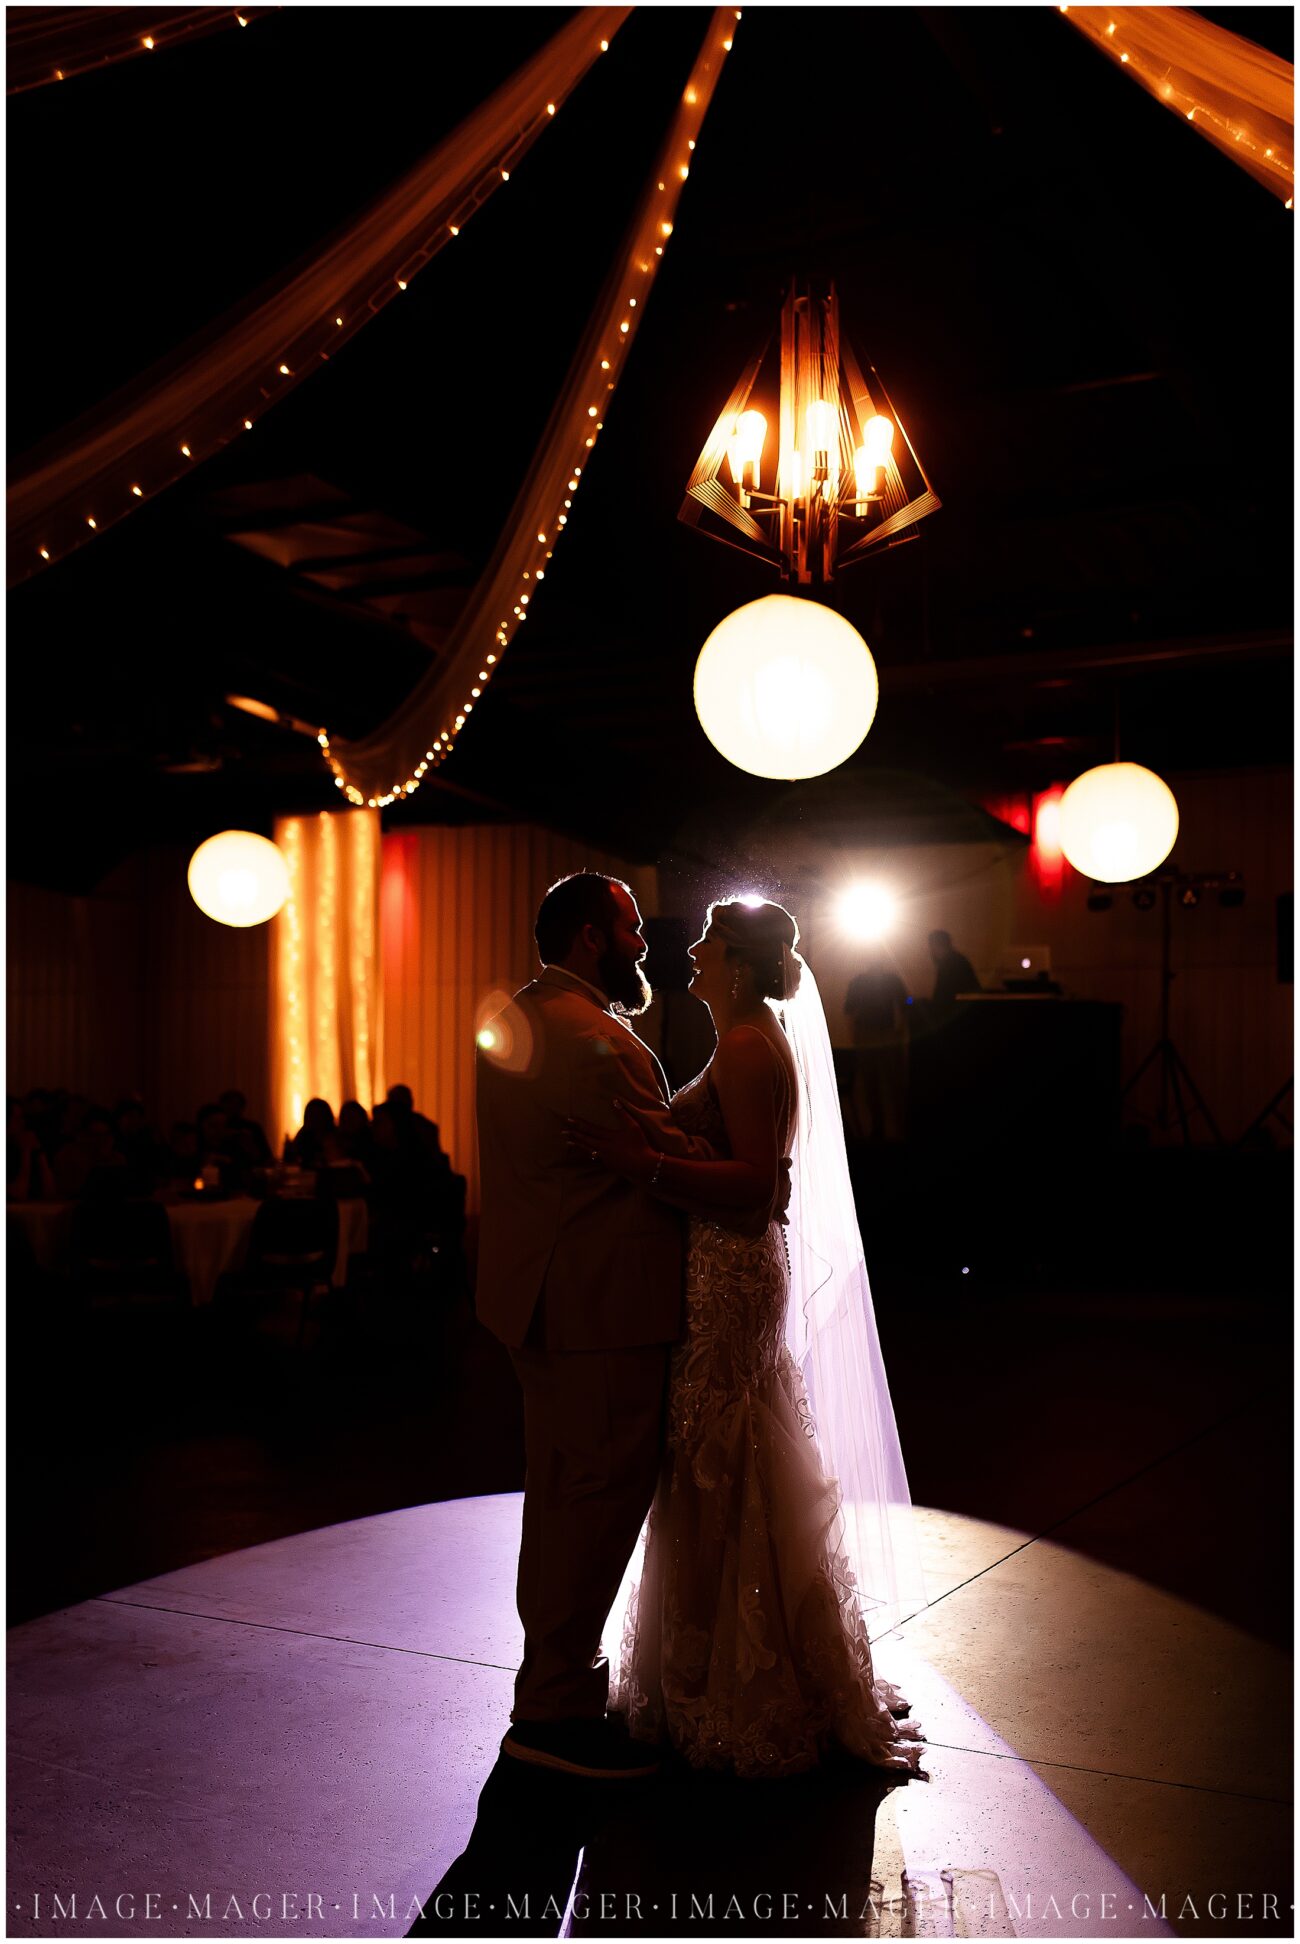 A small town wedding for Casey and Adam. The bride and groom share a first dance under glowing lights at their large wedding reception at the Kankakee County Fairgrounds.

Kankakee County Fairgrounds, Kankakee, IL.

Photo taken by Mager Image Photography.